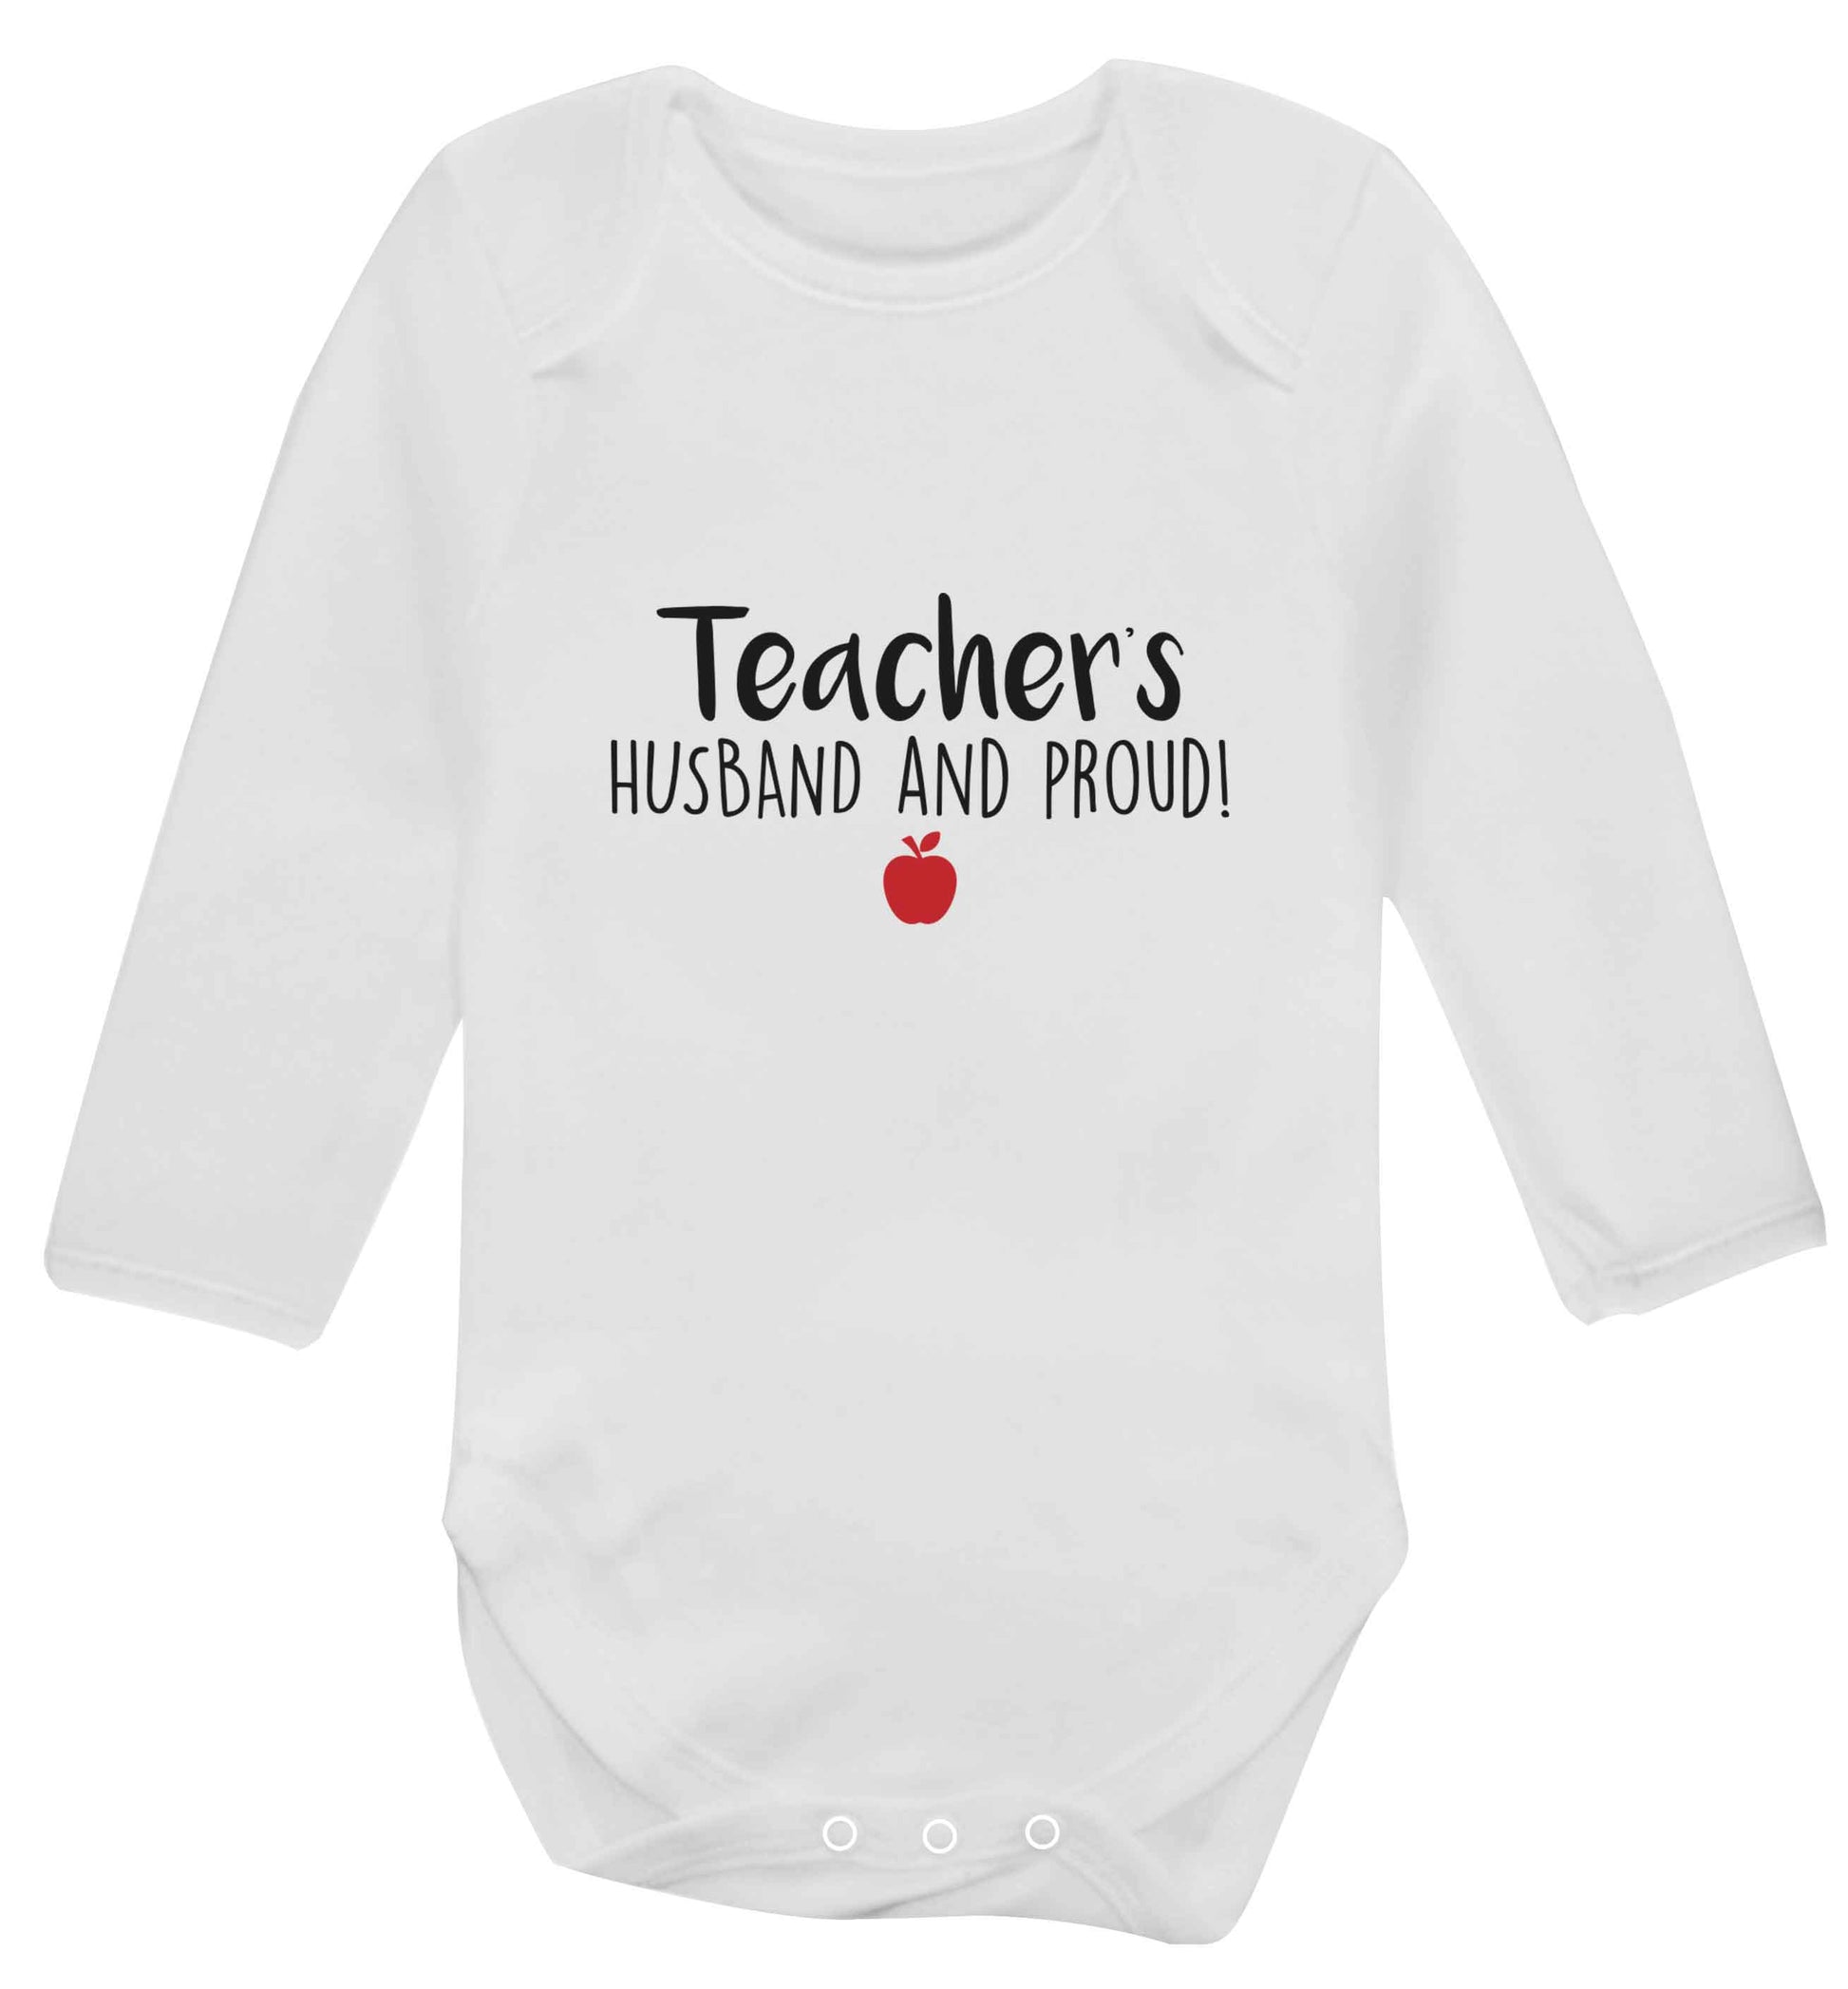 Teachers husband and proud baby vest long sleeved white 6-12 months